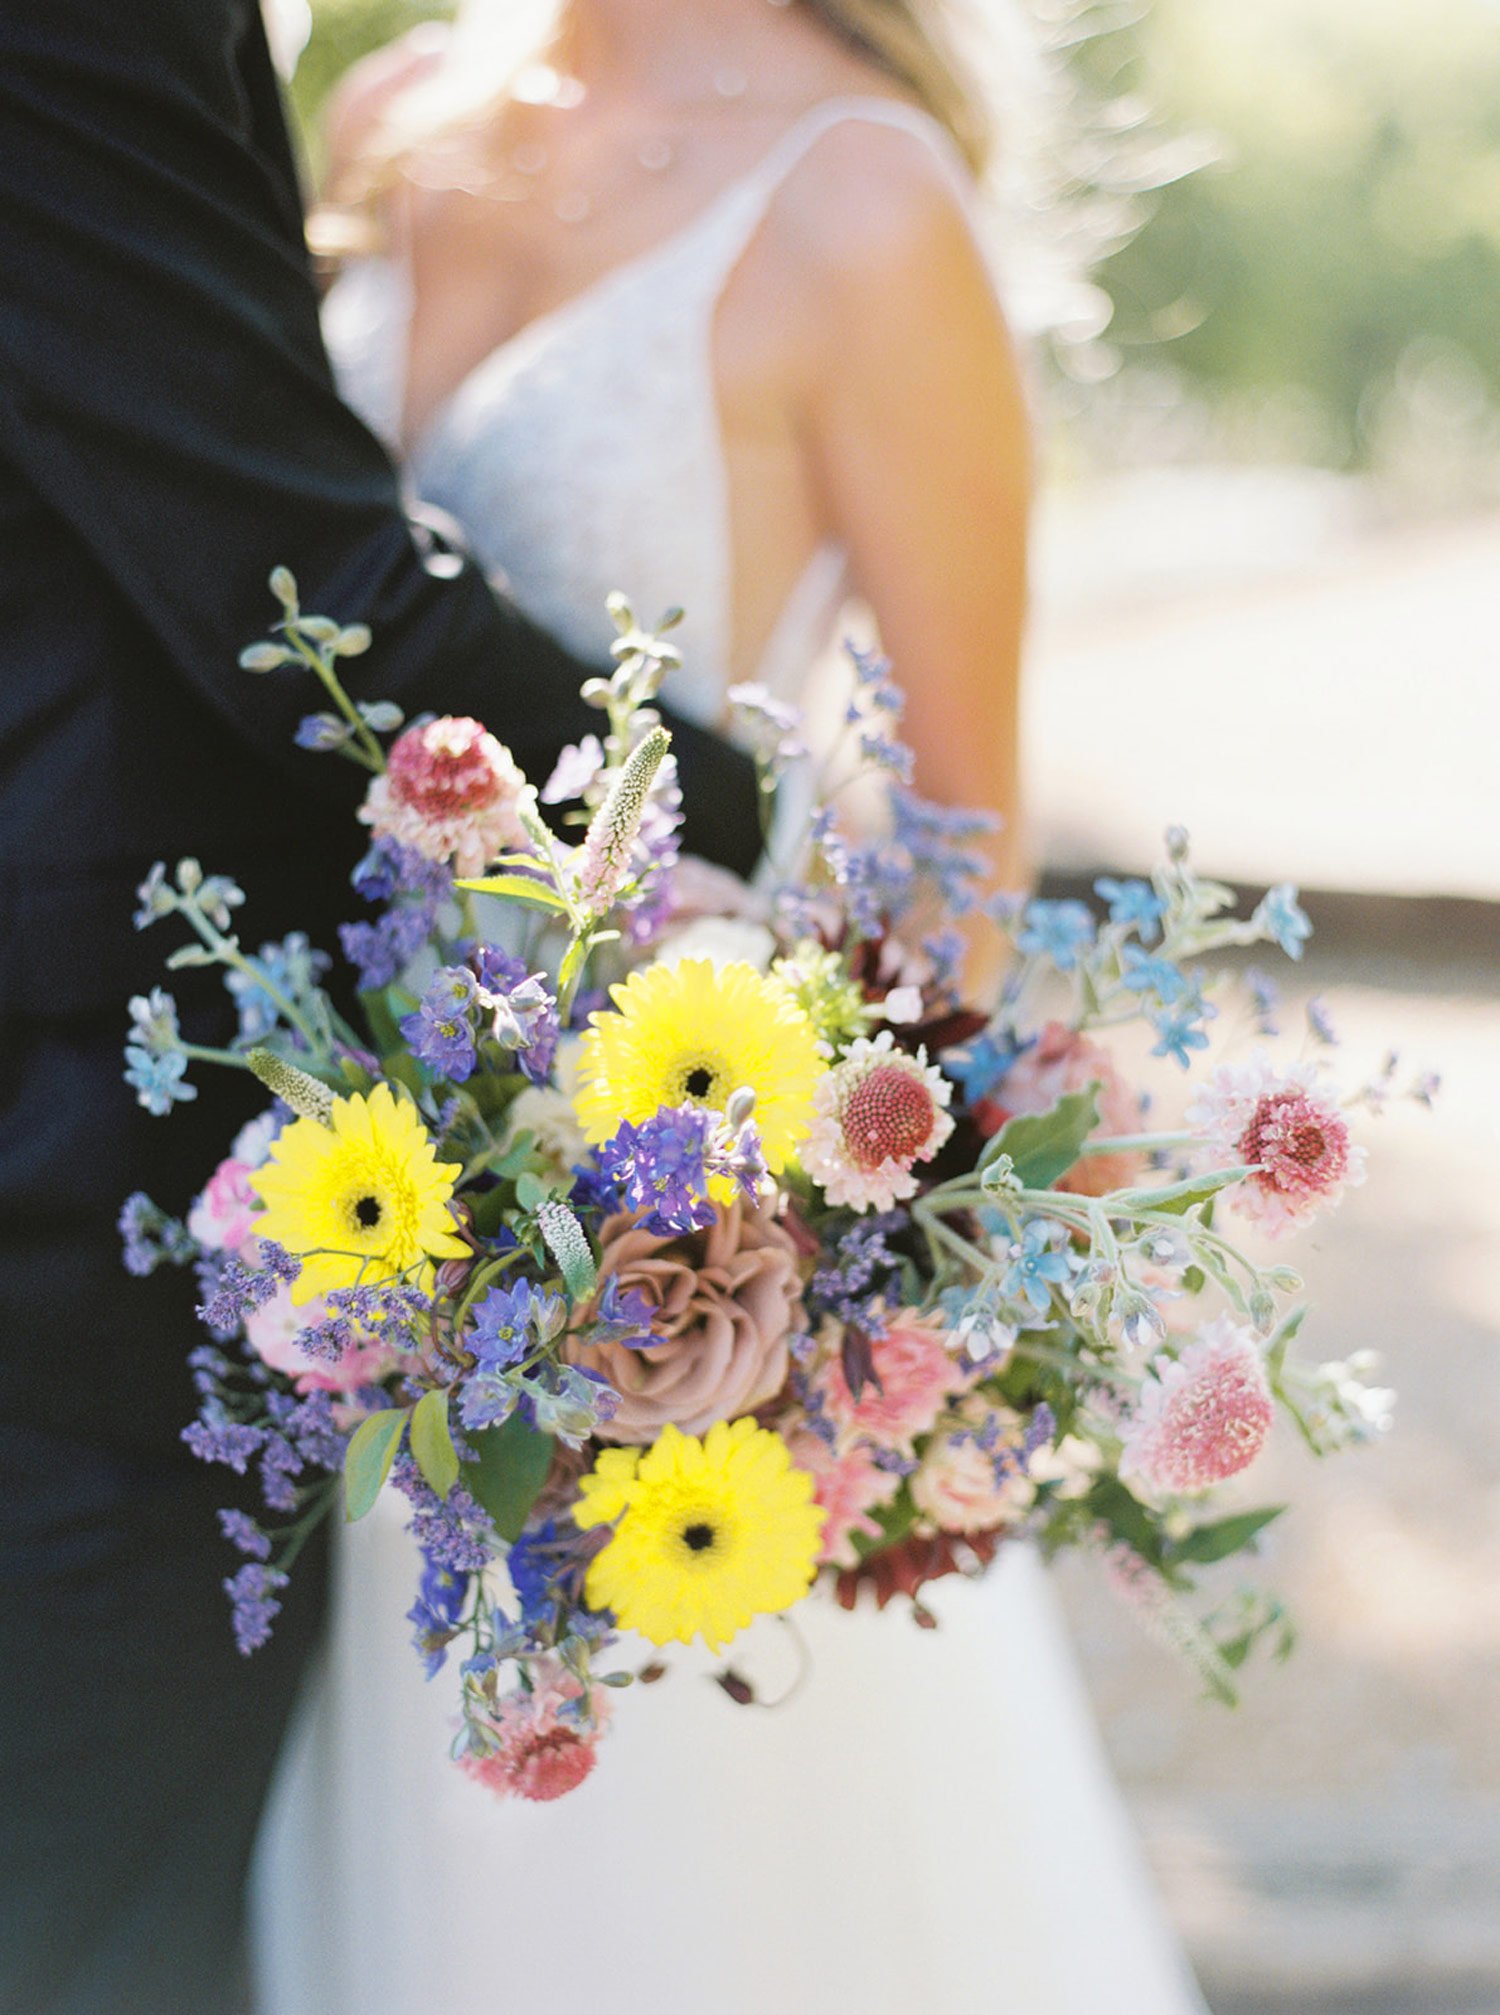 Lush wildflower wedding bouquet with yellow purple blue flowers designed by Montana wedding planner Shannon rose events